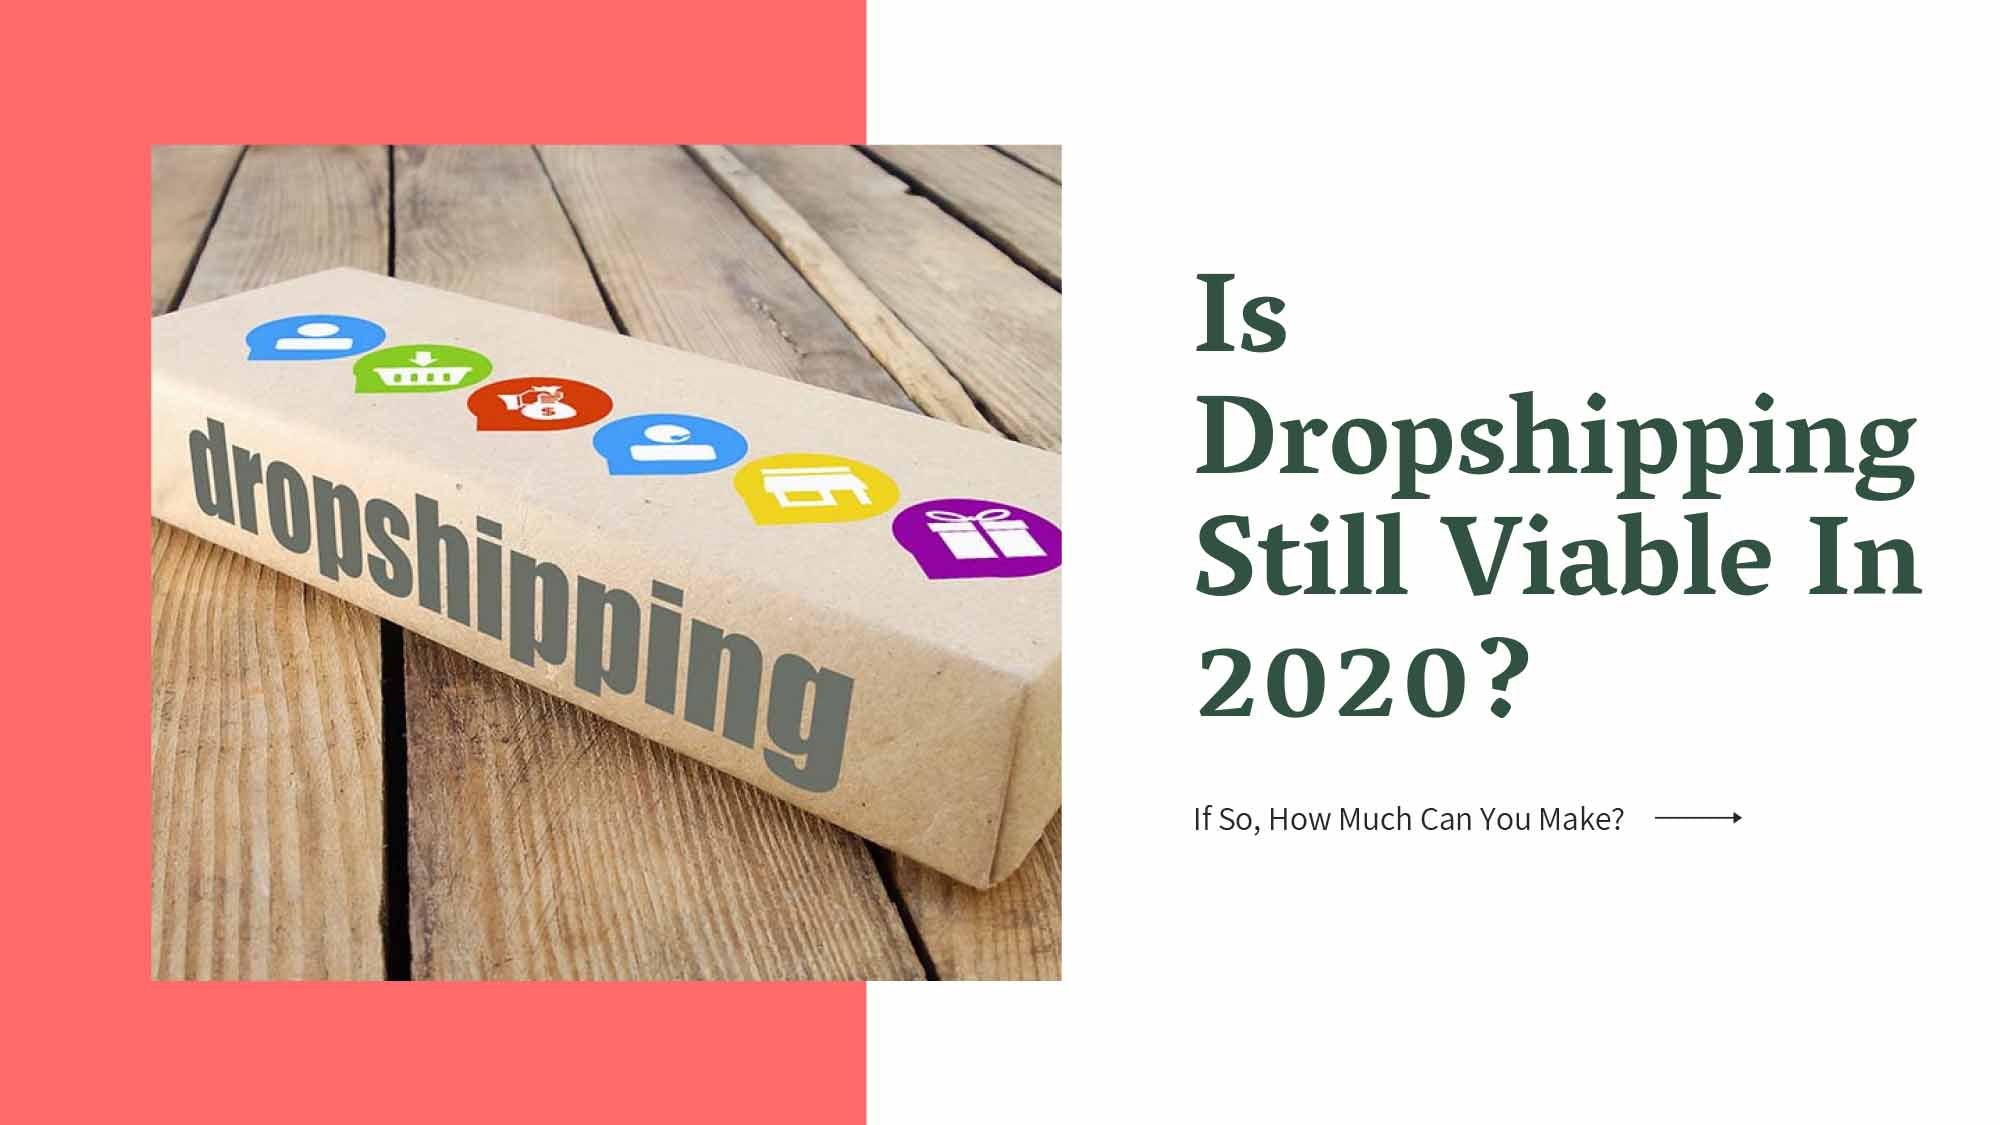 Is Dropshipping Still Viable In 2020? If So, How Much Can You Make?